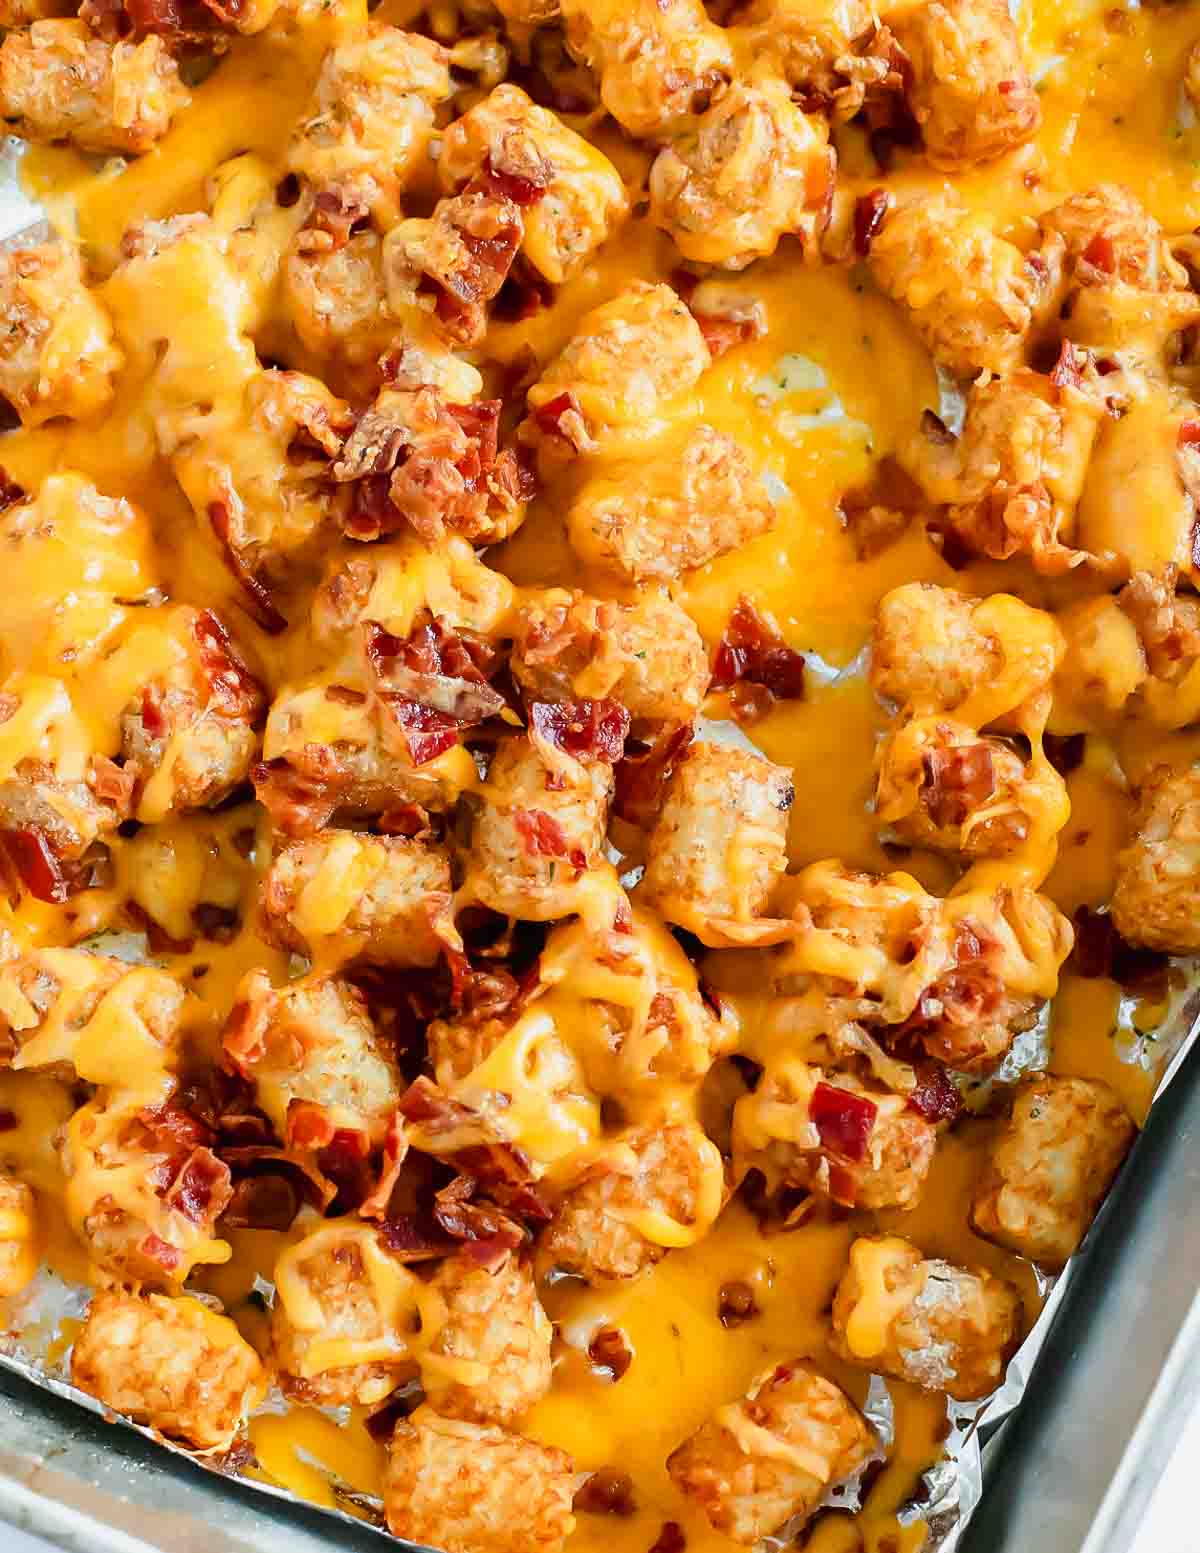 Cheesy tater tots in a baking dish.